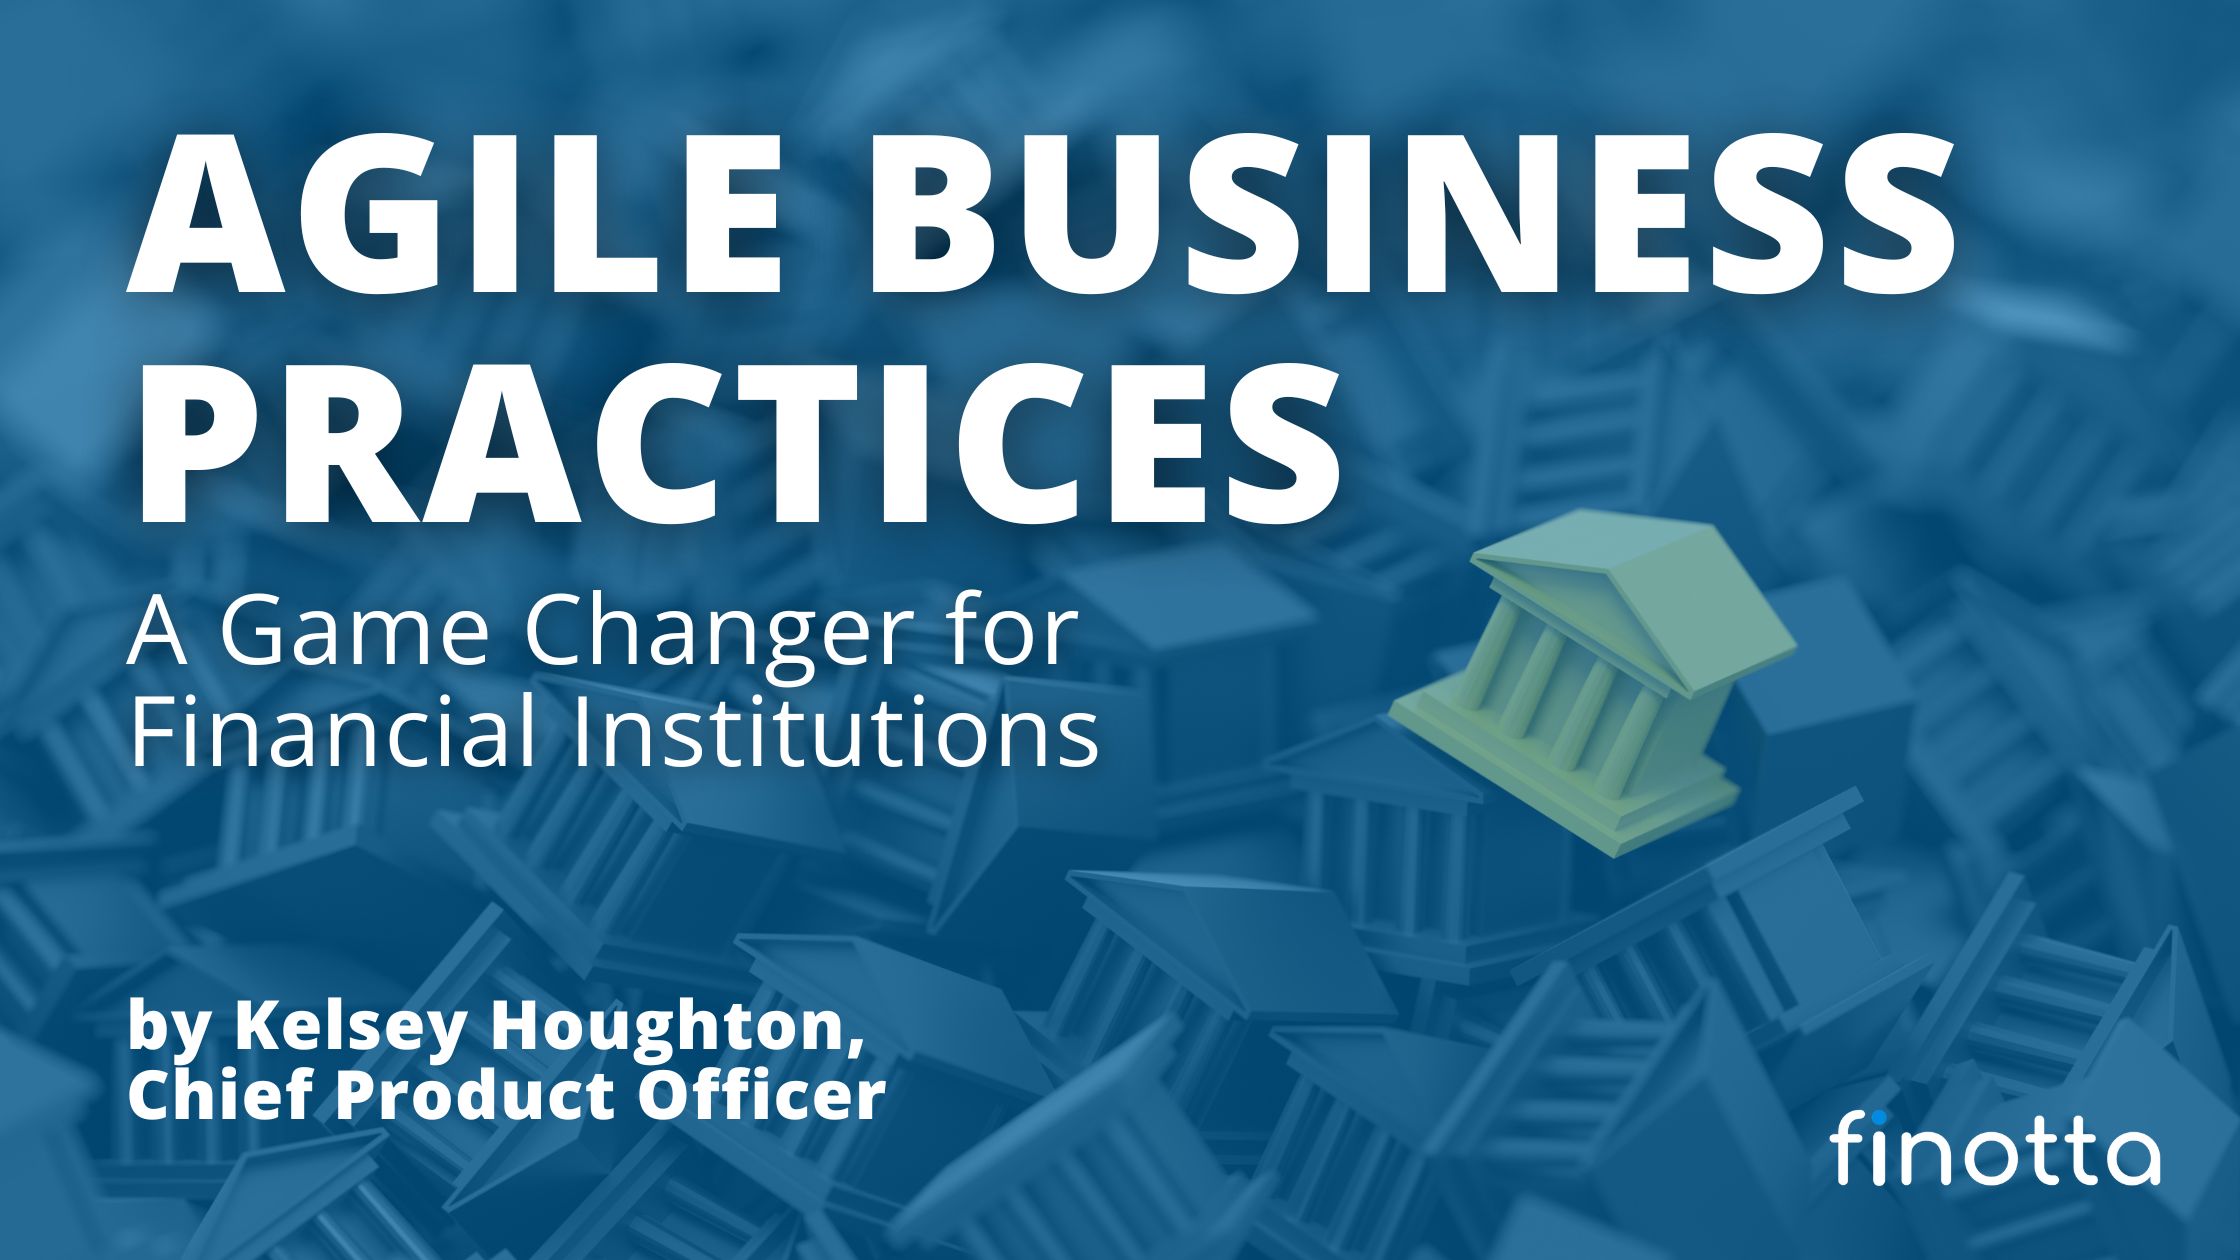 Agile Business Practices: A Game Changer for Financial Institutions